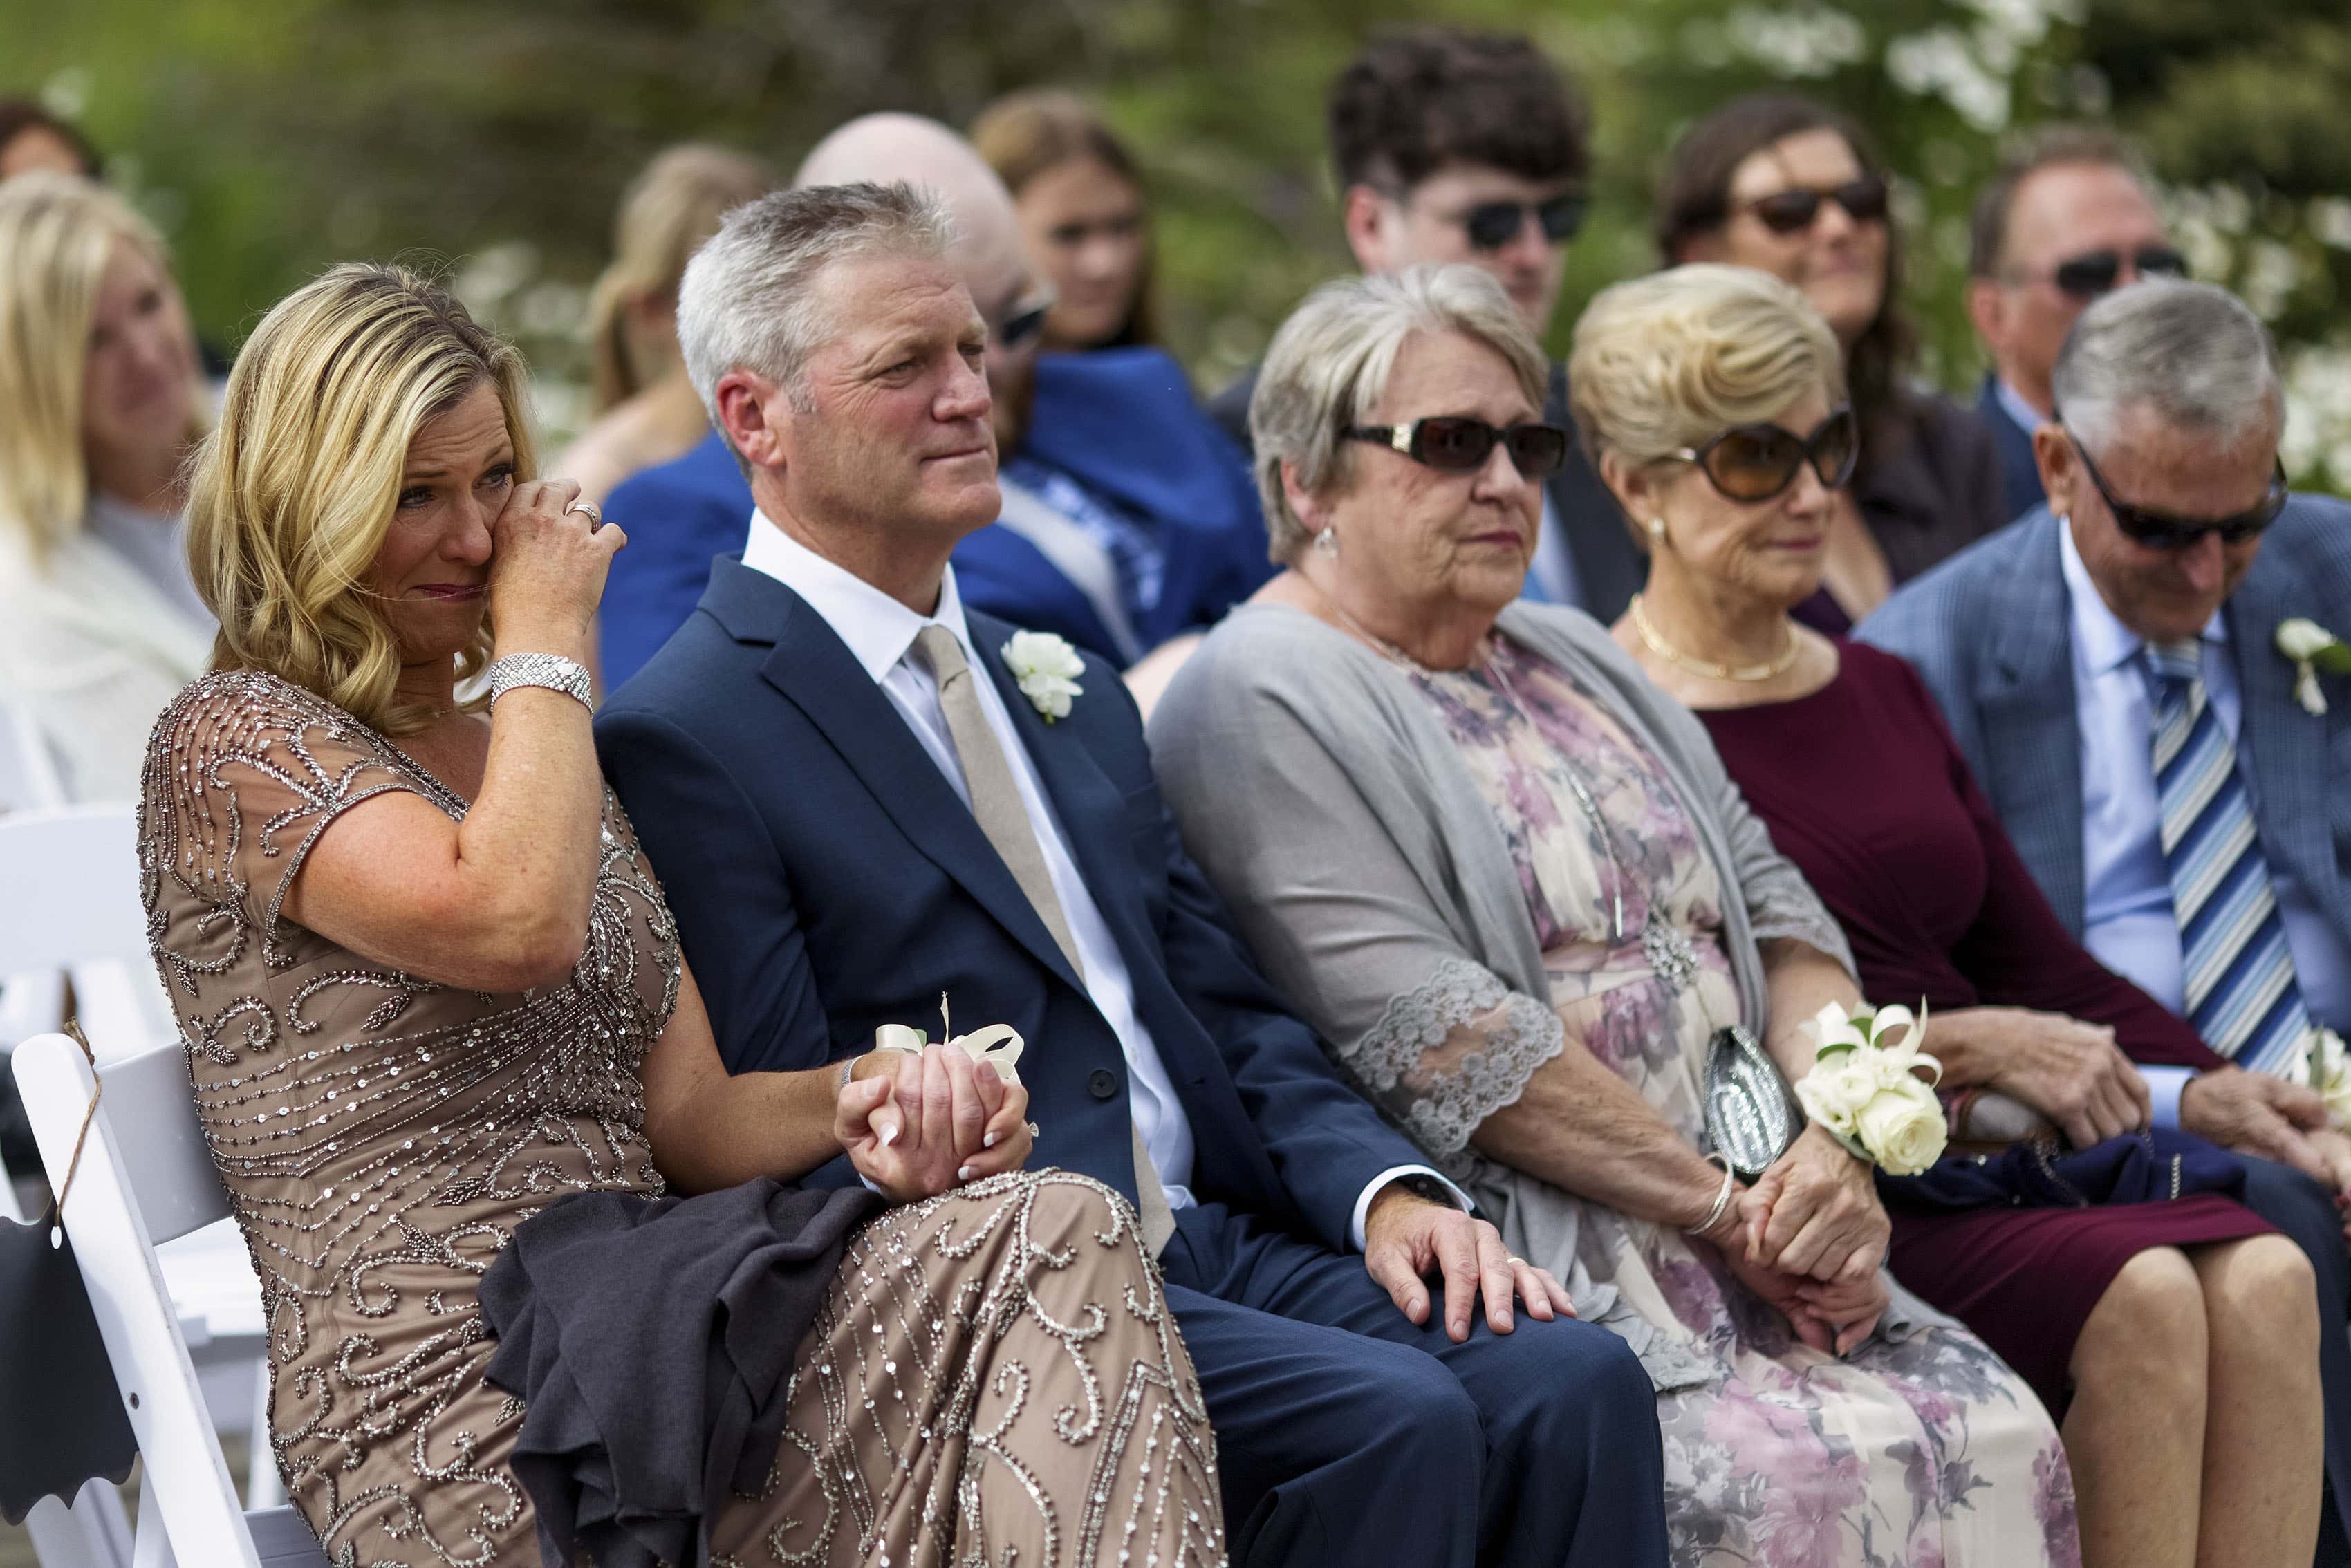 The mother of the bride wipes a tear away during the ceremony